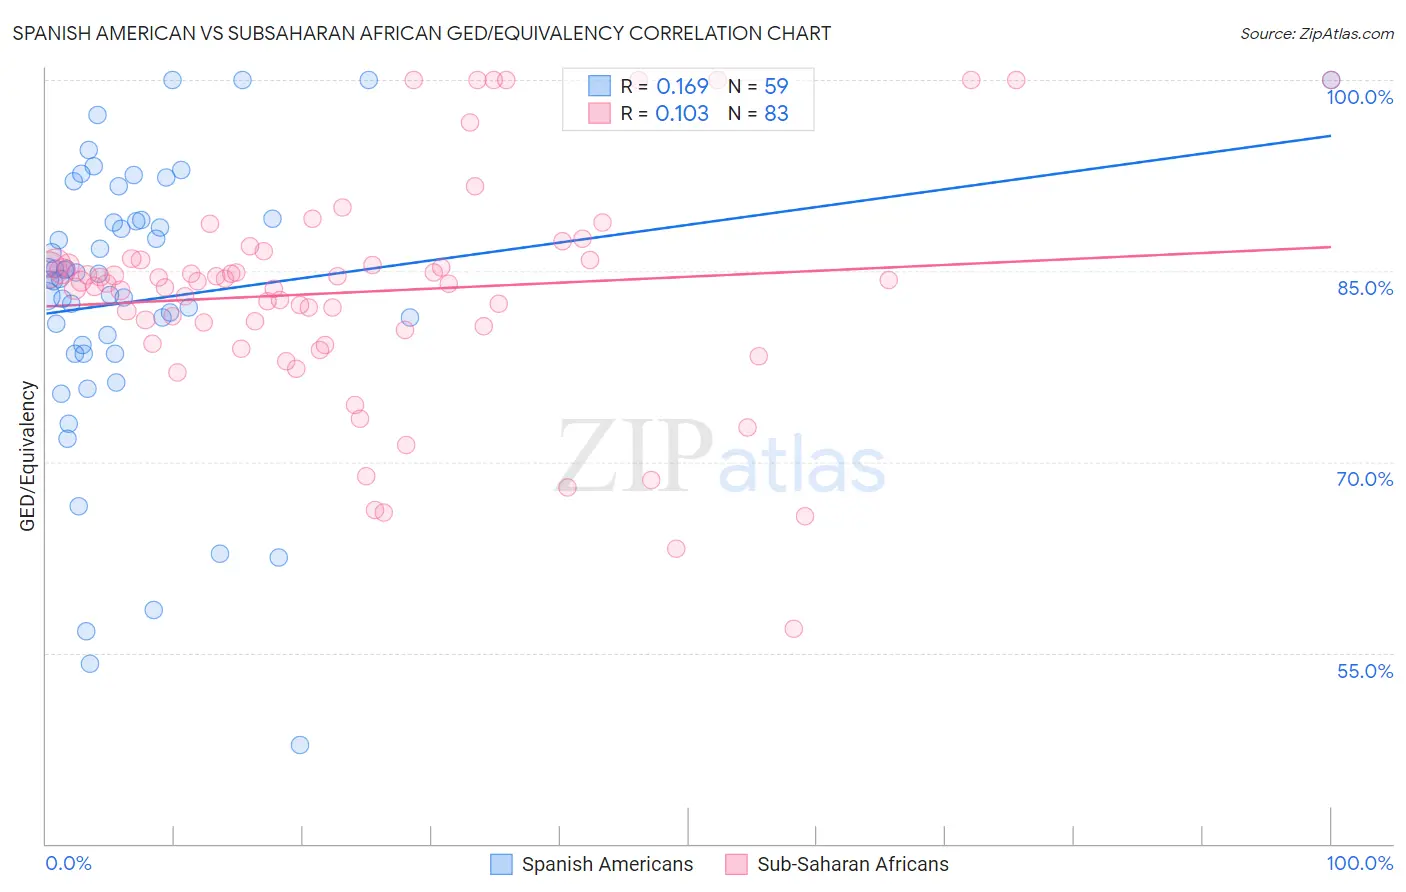 Spanish American vs Subsaharan African GED/Equivalency